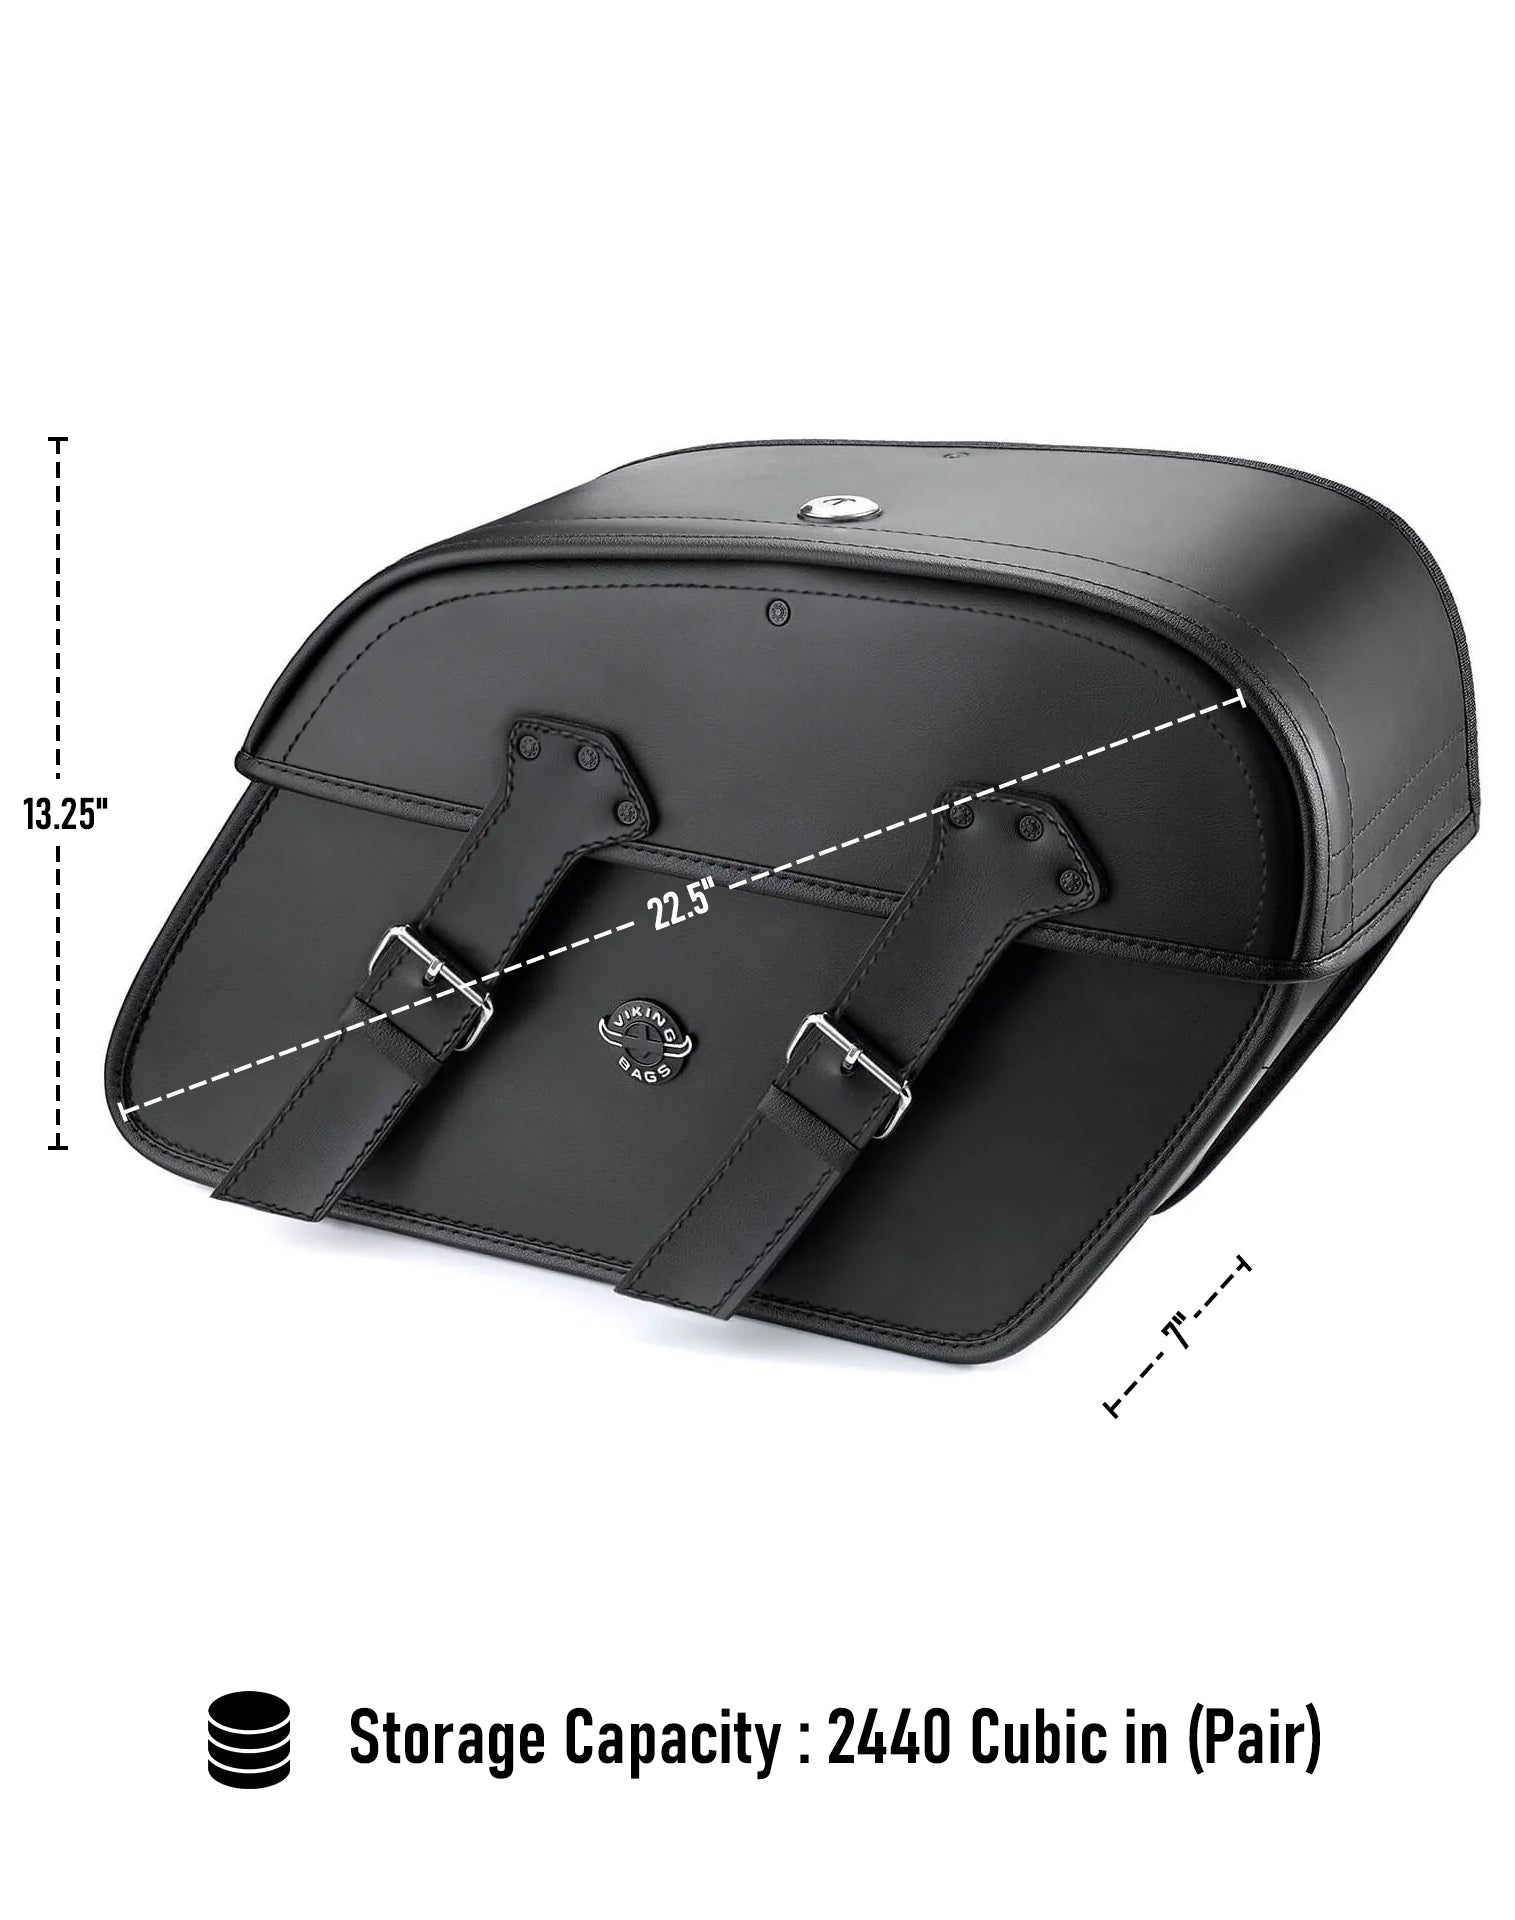 Viking Raven Extra Large Yamaha Stryker Leather Motorcycle Saddlebags Can Store Your Ridings Gears